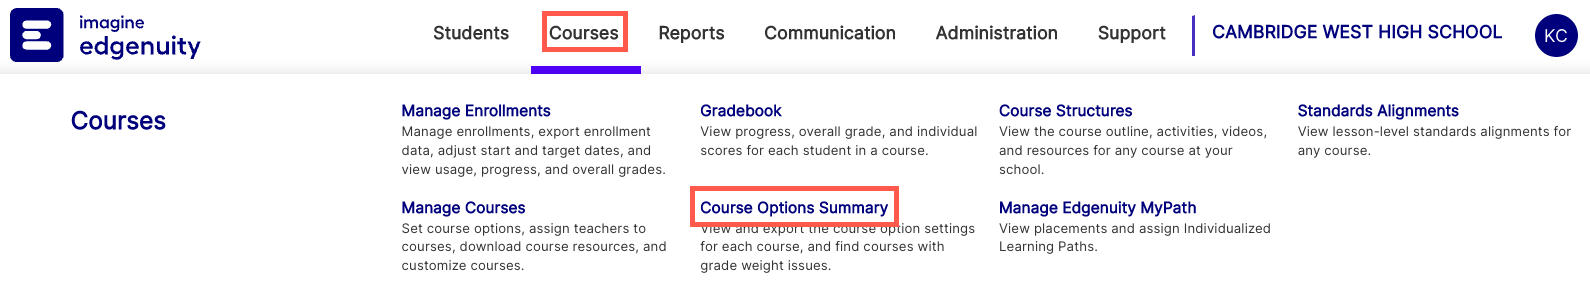 AS-Courses-CourseOptionsSummaryTab.png